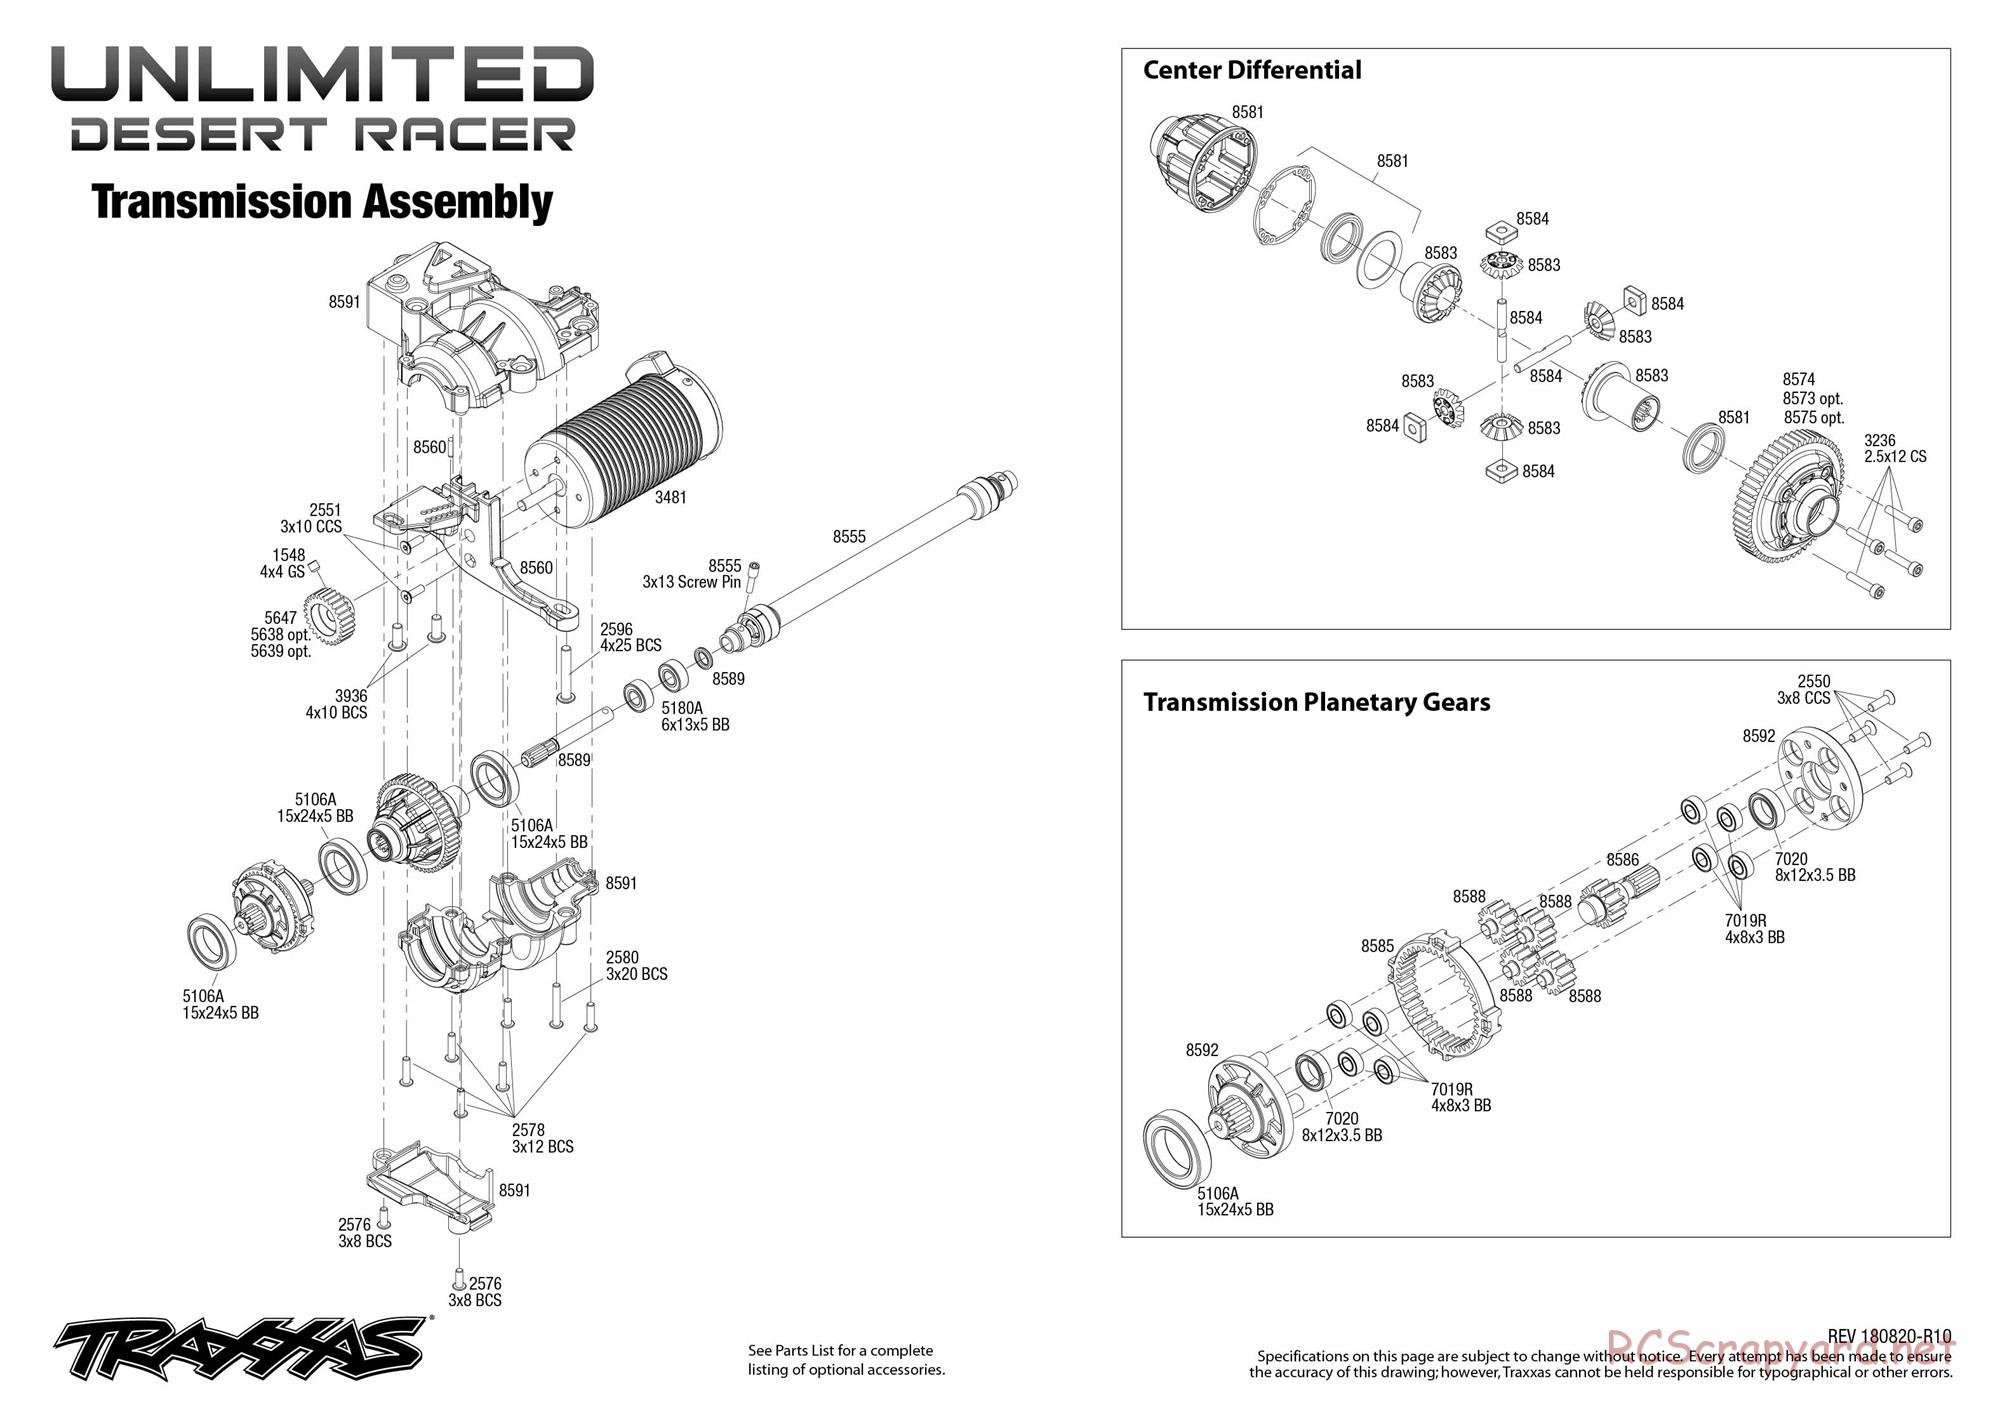 Traxxas - Unlimited Desert Racer VXL TSM (2018) - Exploded Views - Page 7